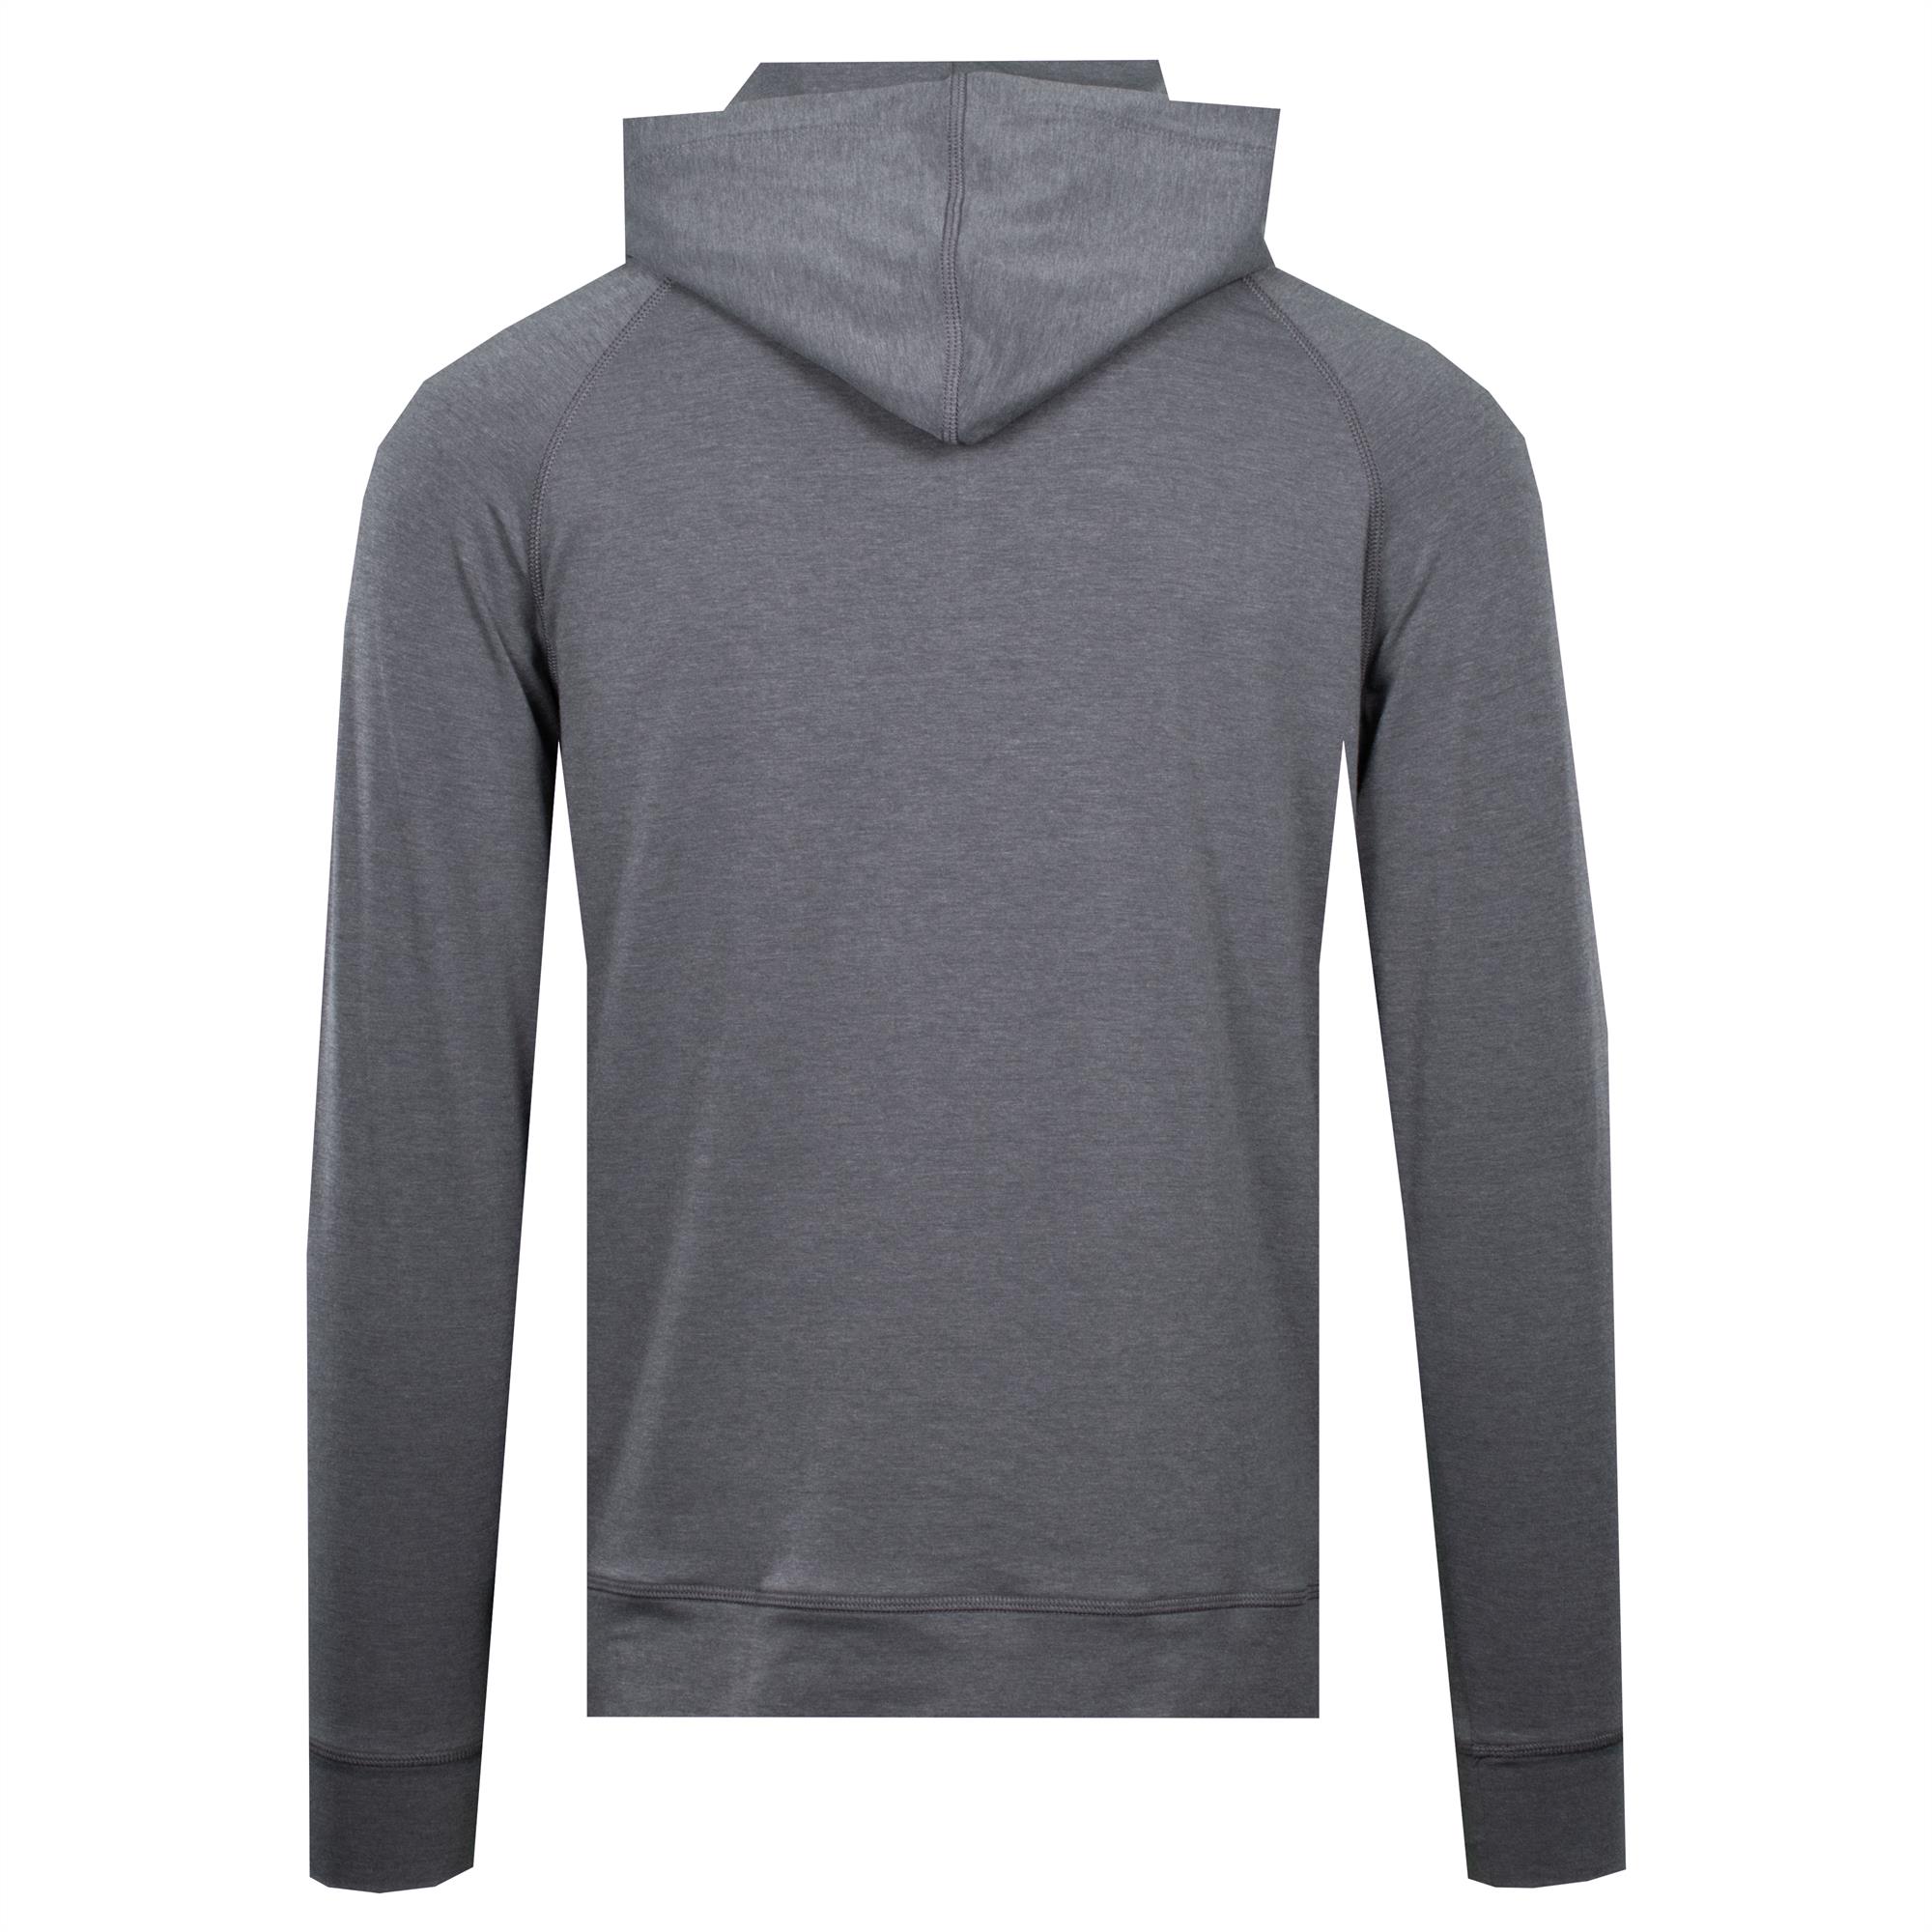 G/FORE Melange Hooded Luxe Staple Quarter Zip Mens Golf Mid Layer Charcoal Heather Grey